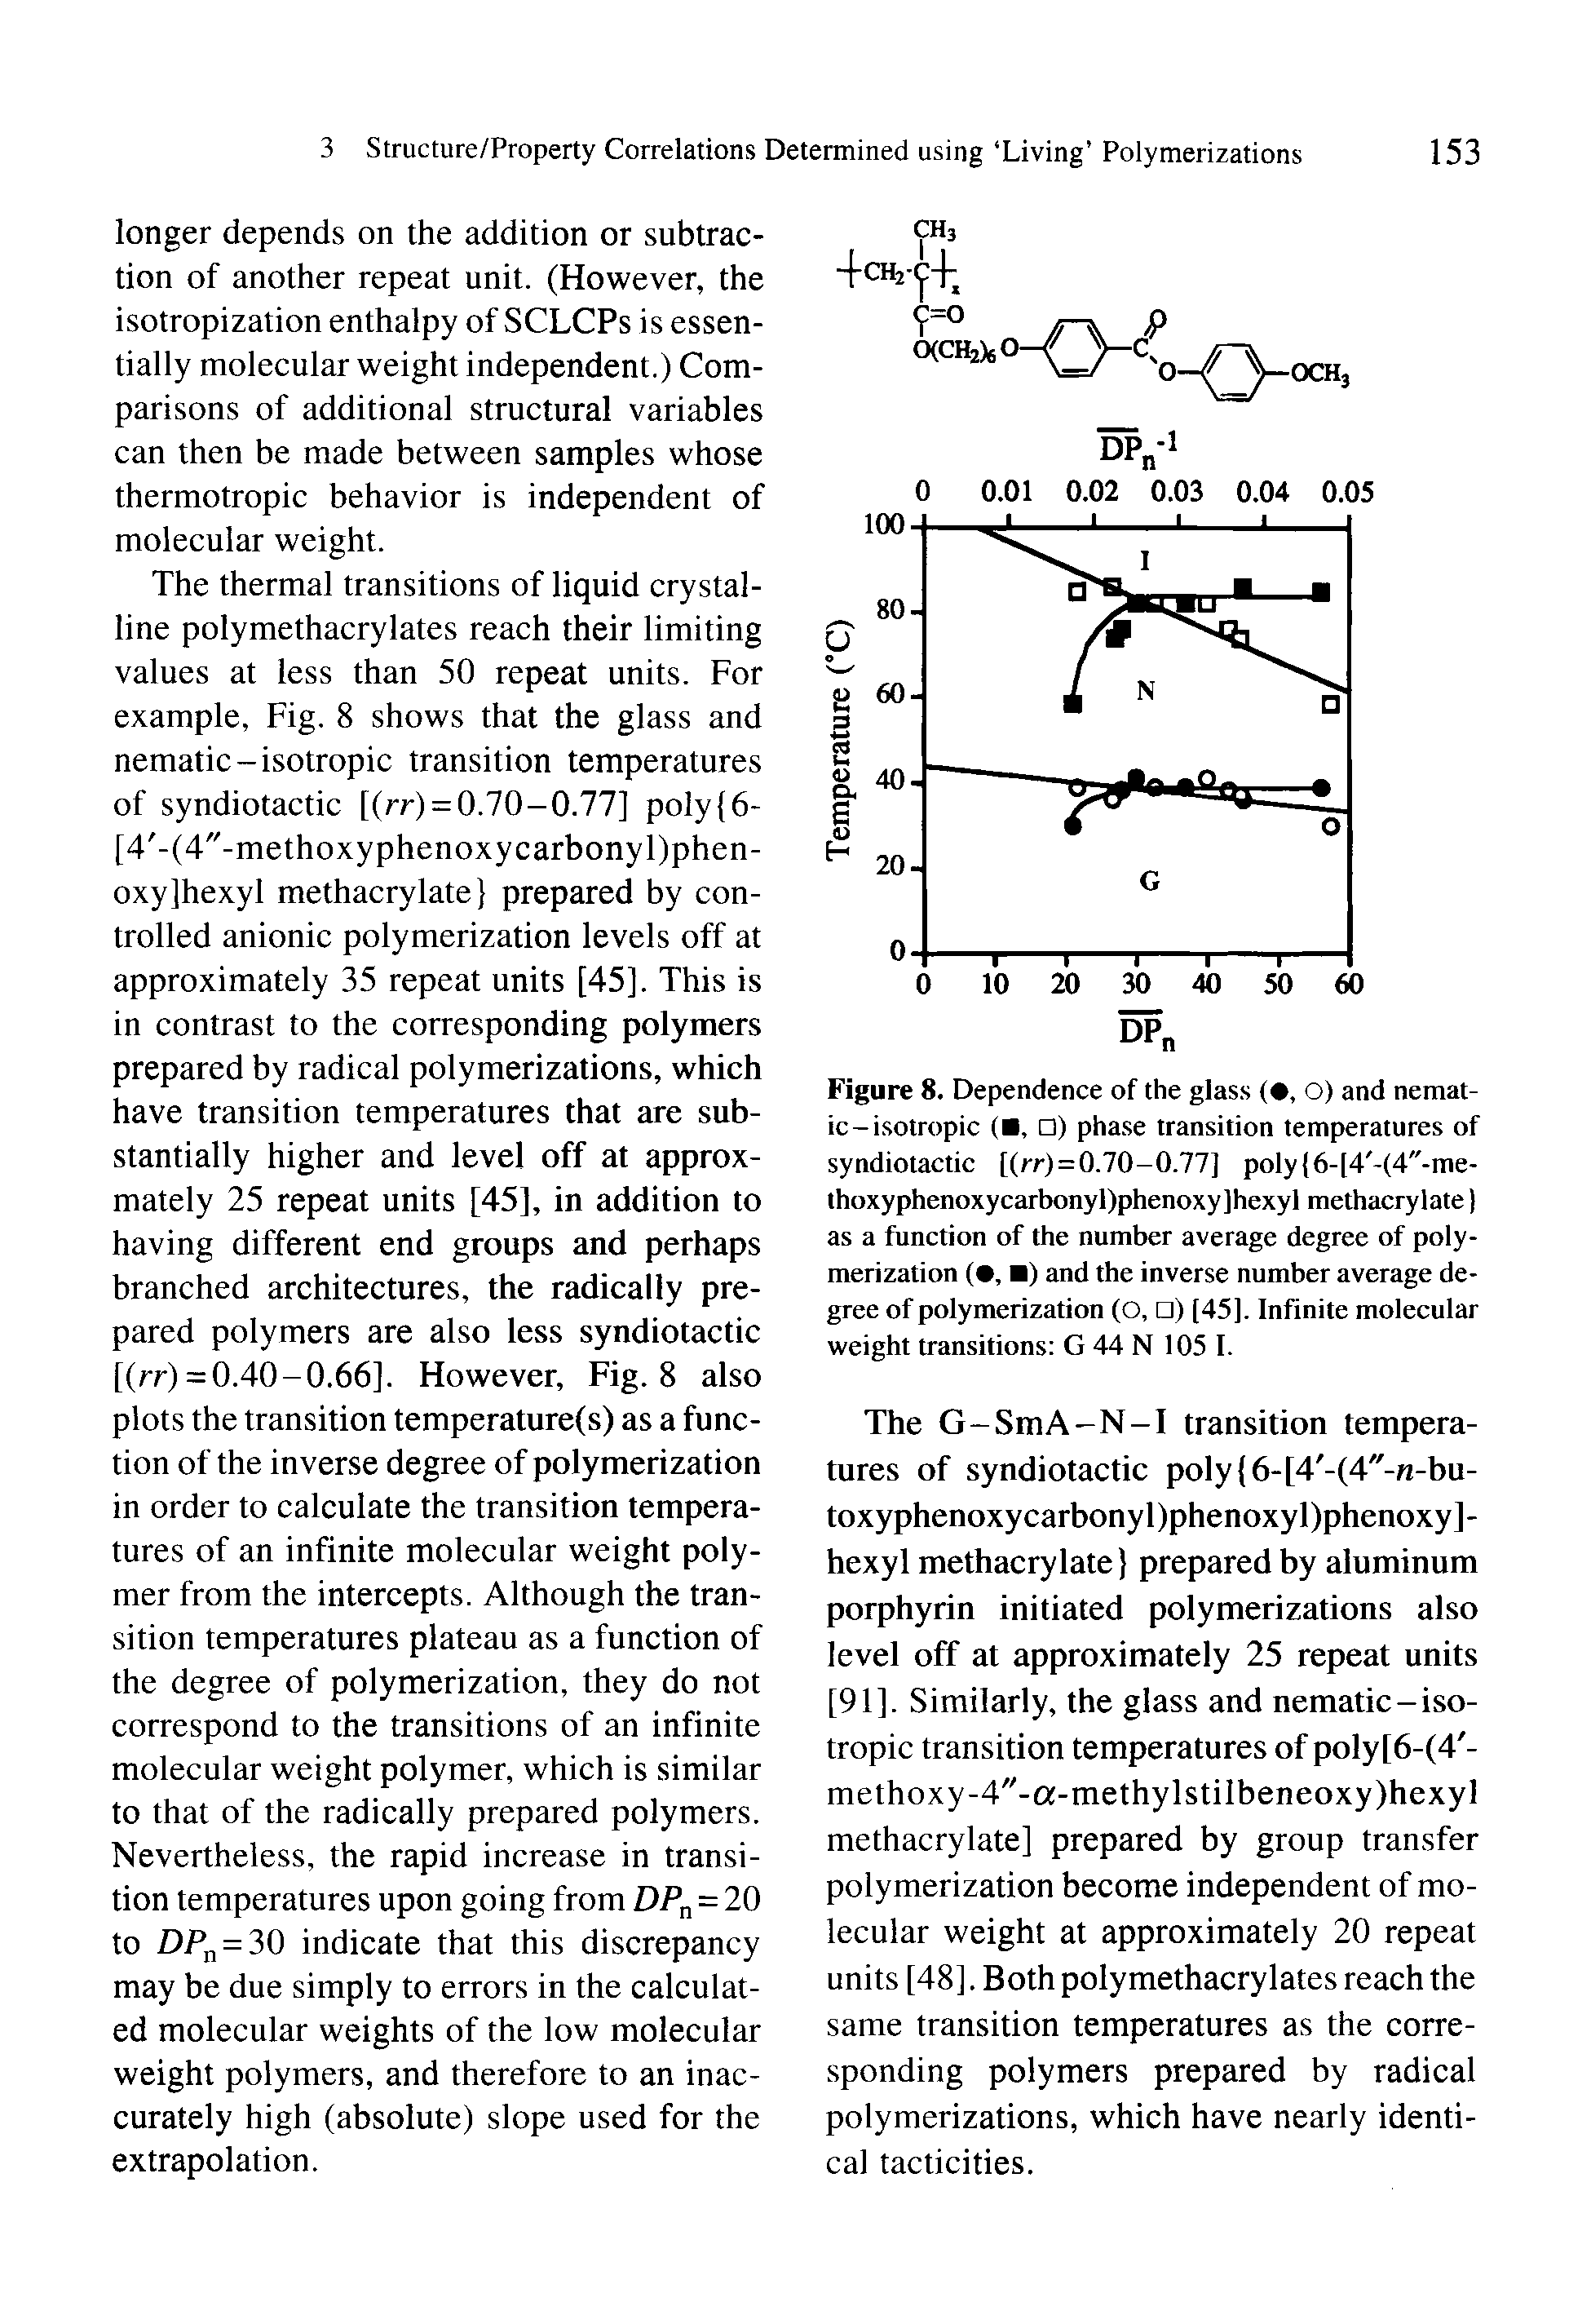 Figure 8. Dependence of the glass ( , O) and nematic-isotropic ( , ) pha.se transition temperatures of syndiotactic [(/r)=0.70-0.77] poly 6-[4 -(4"-me-Ihoxyphenoxycartxmyhphenoxy ]hexyl methacrylate) as a function of the number average degree of polymerization ( , ) and the inverse number average degree of polymerization (O, ) [45]. Infinite molecular weight transitions G 44 N 105 I.